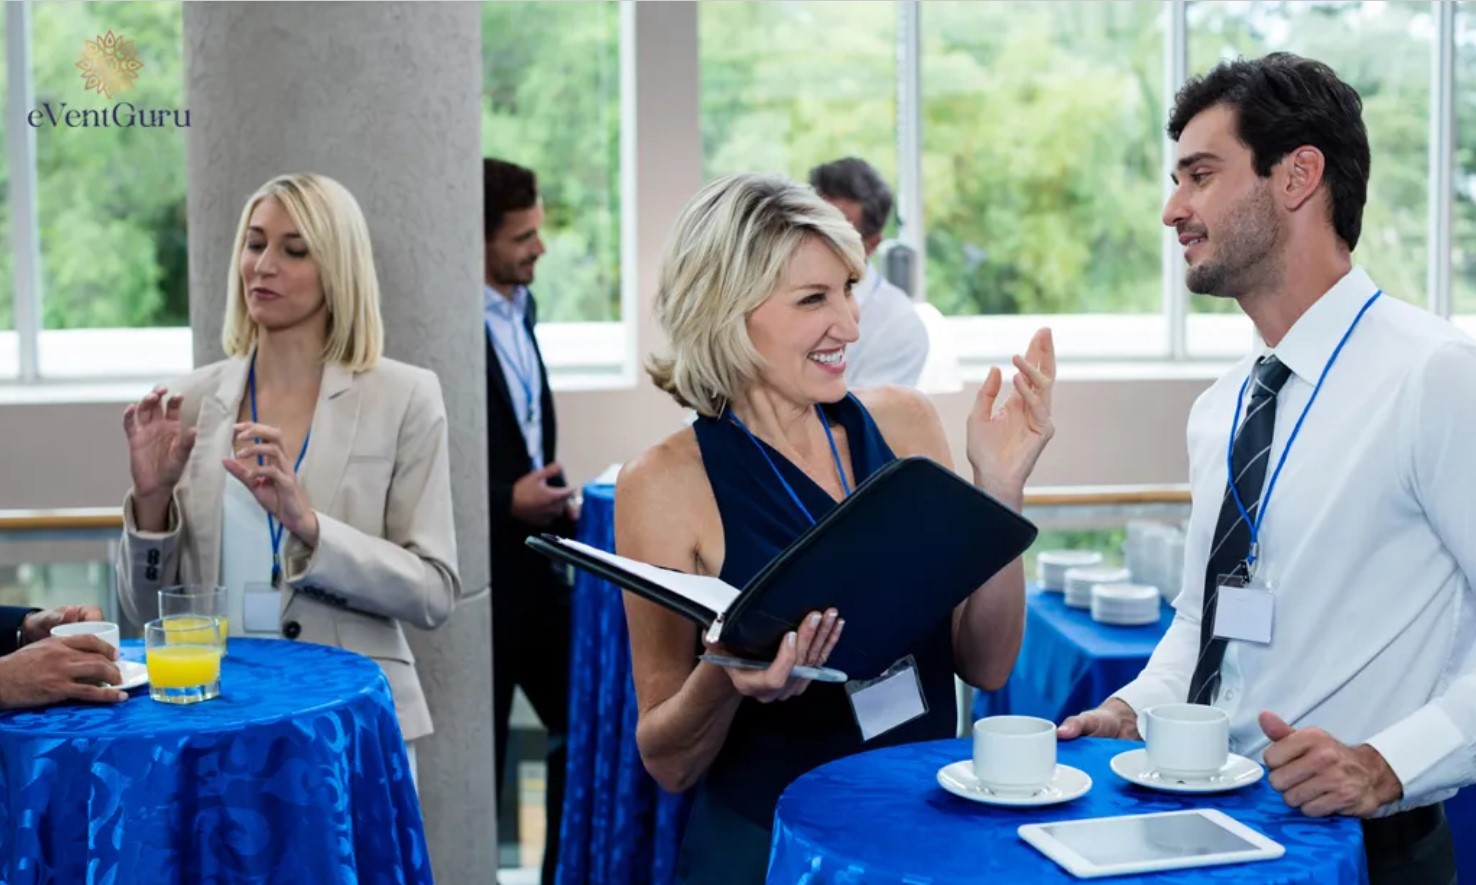 Checklist for Corporate Event Planning